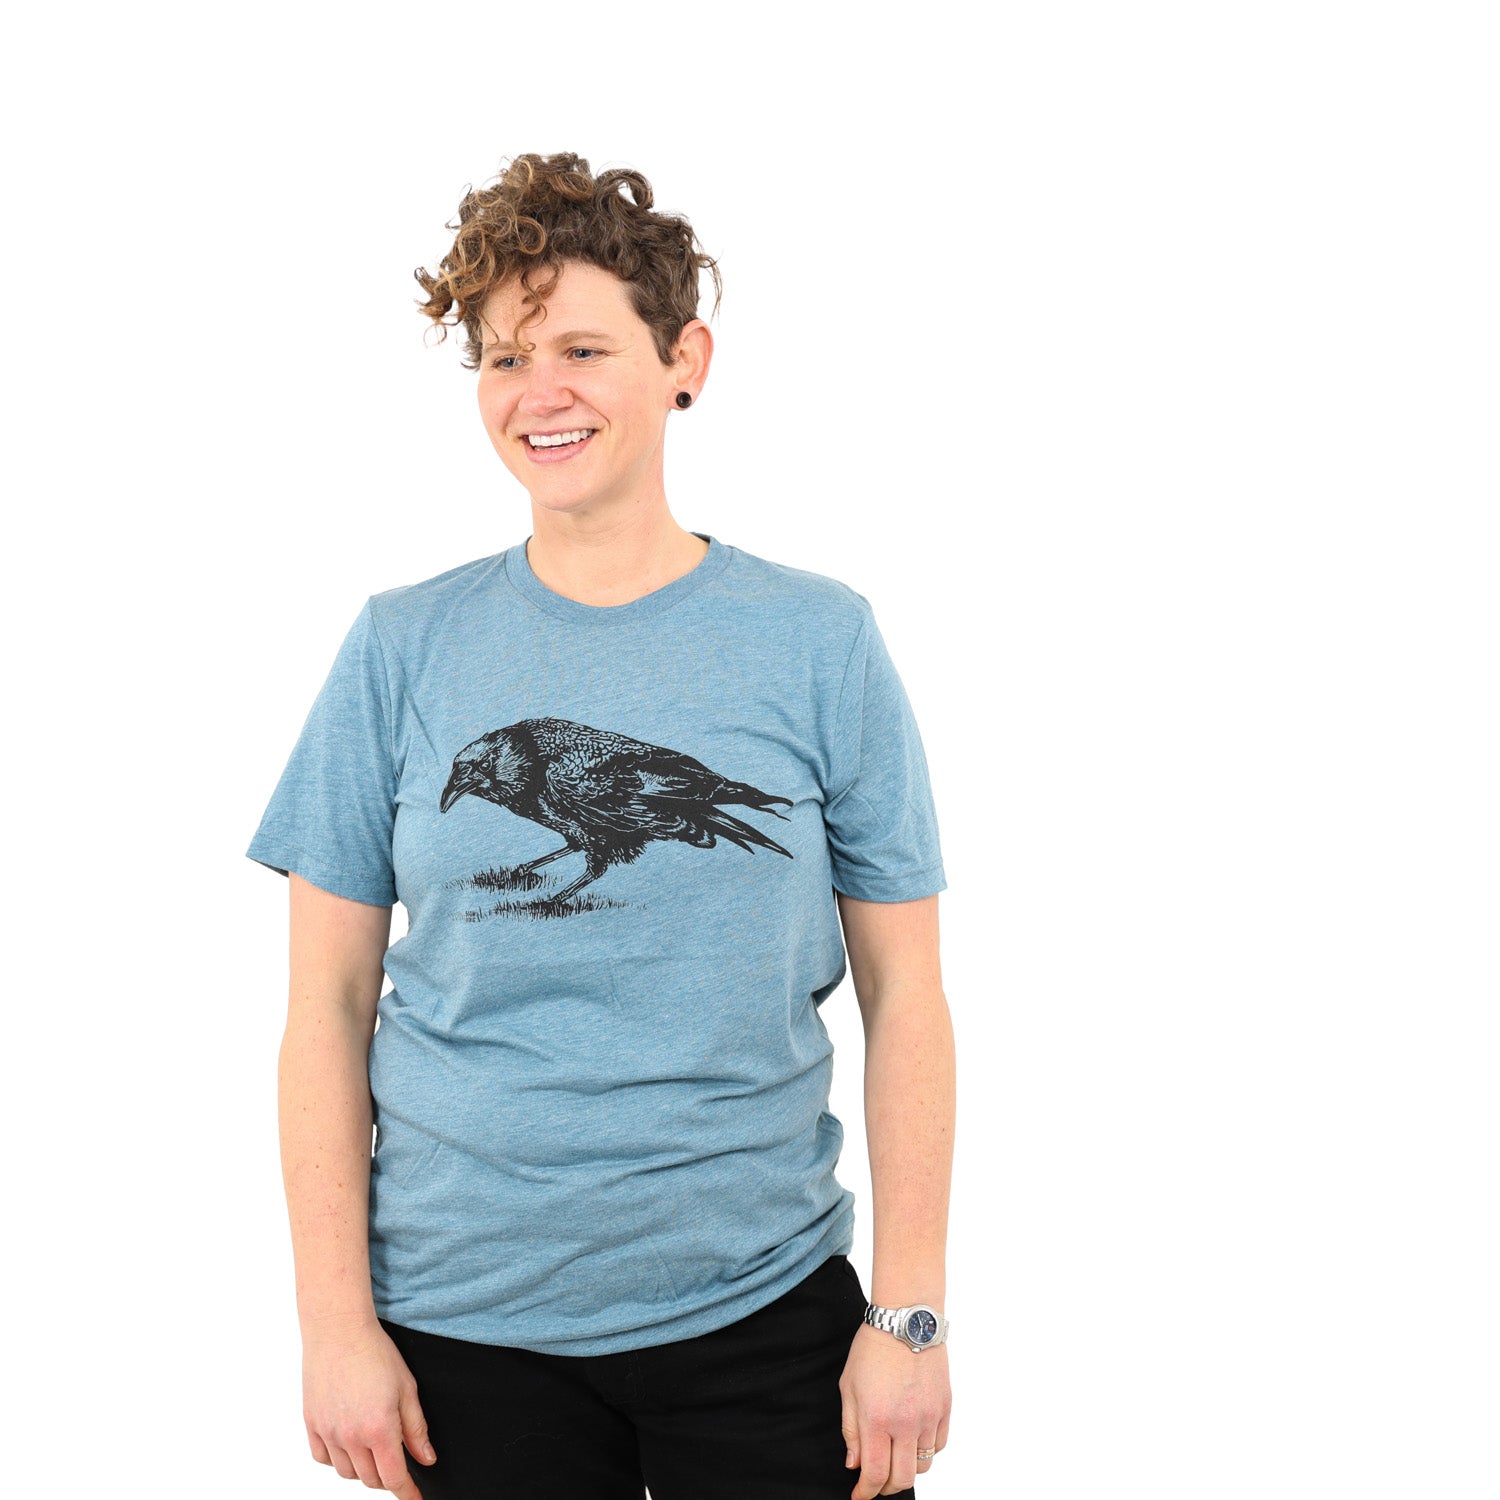 Women wearing blue shirt with black ink printed crow. 